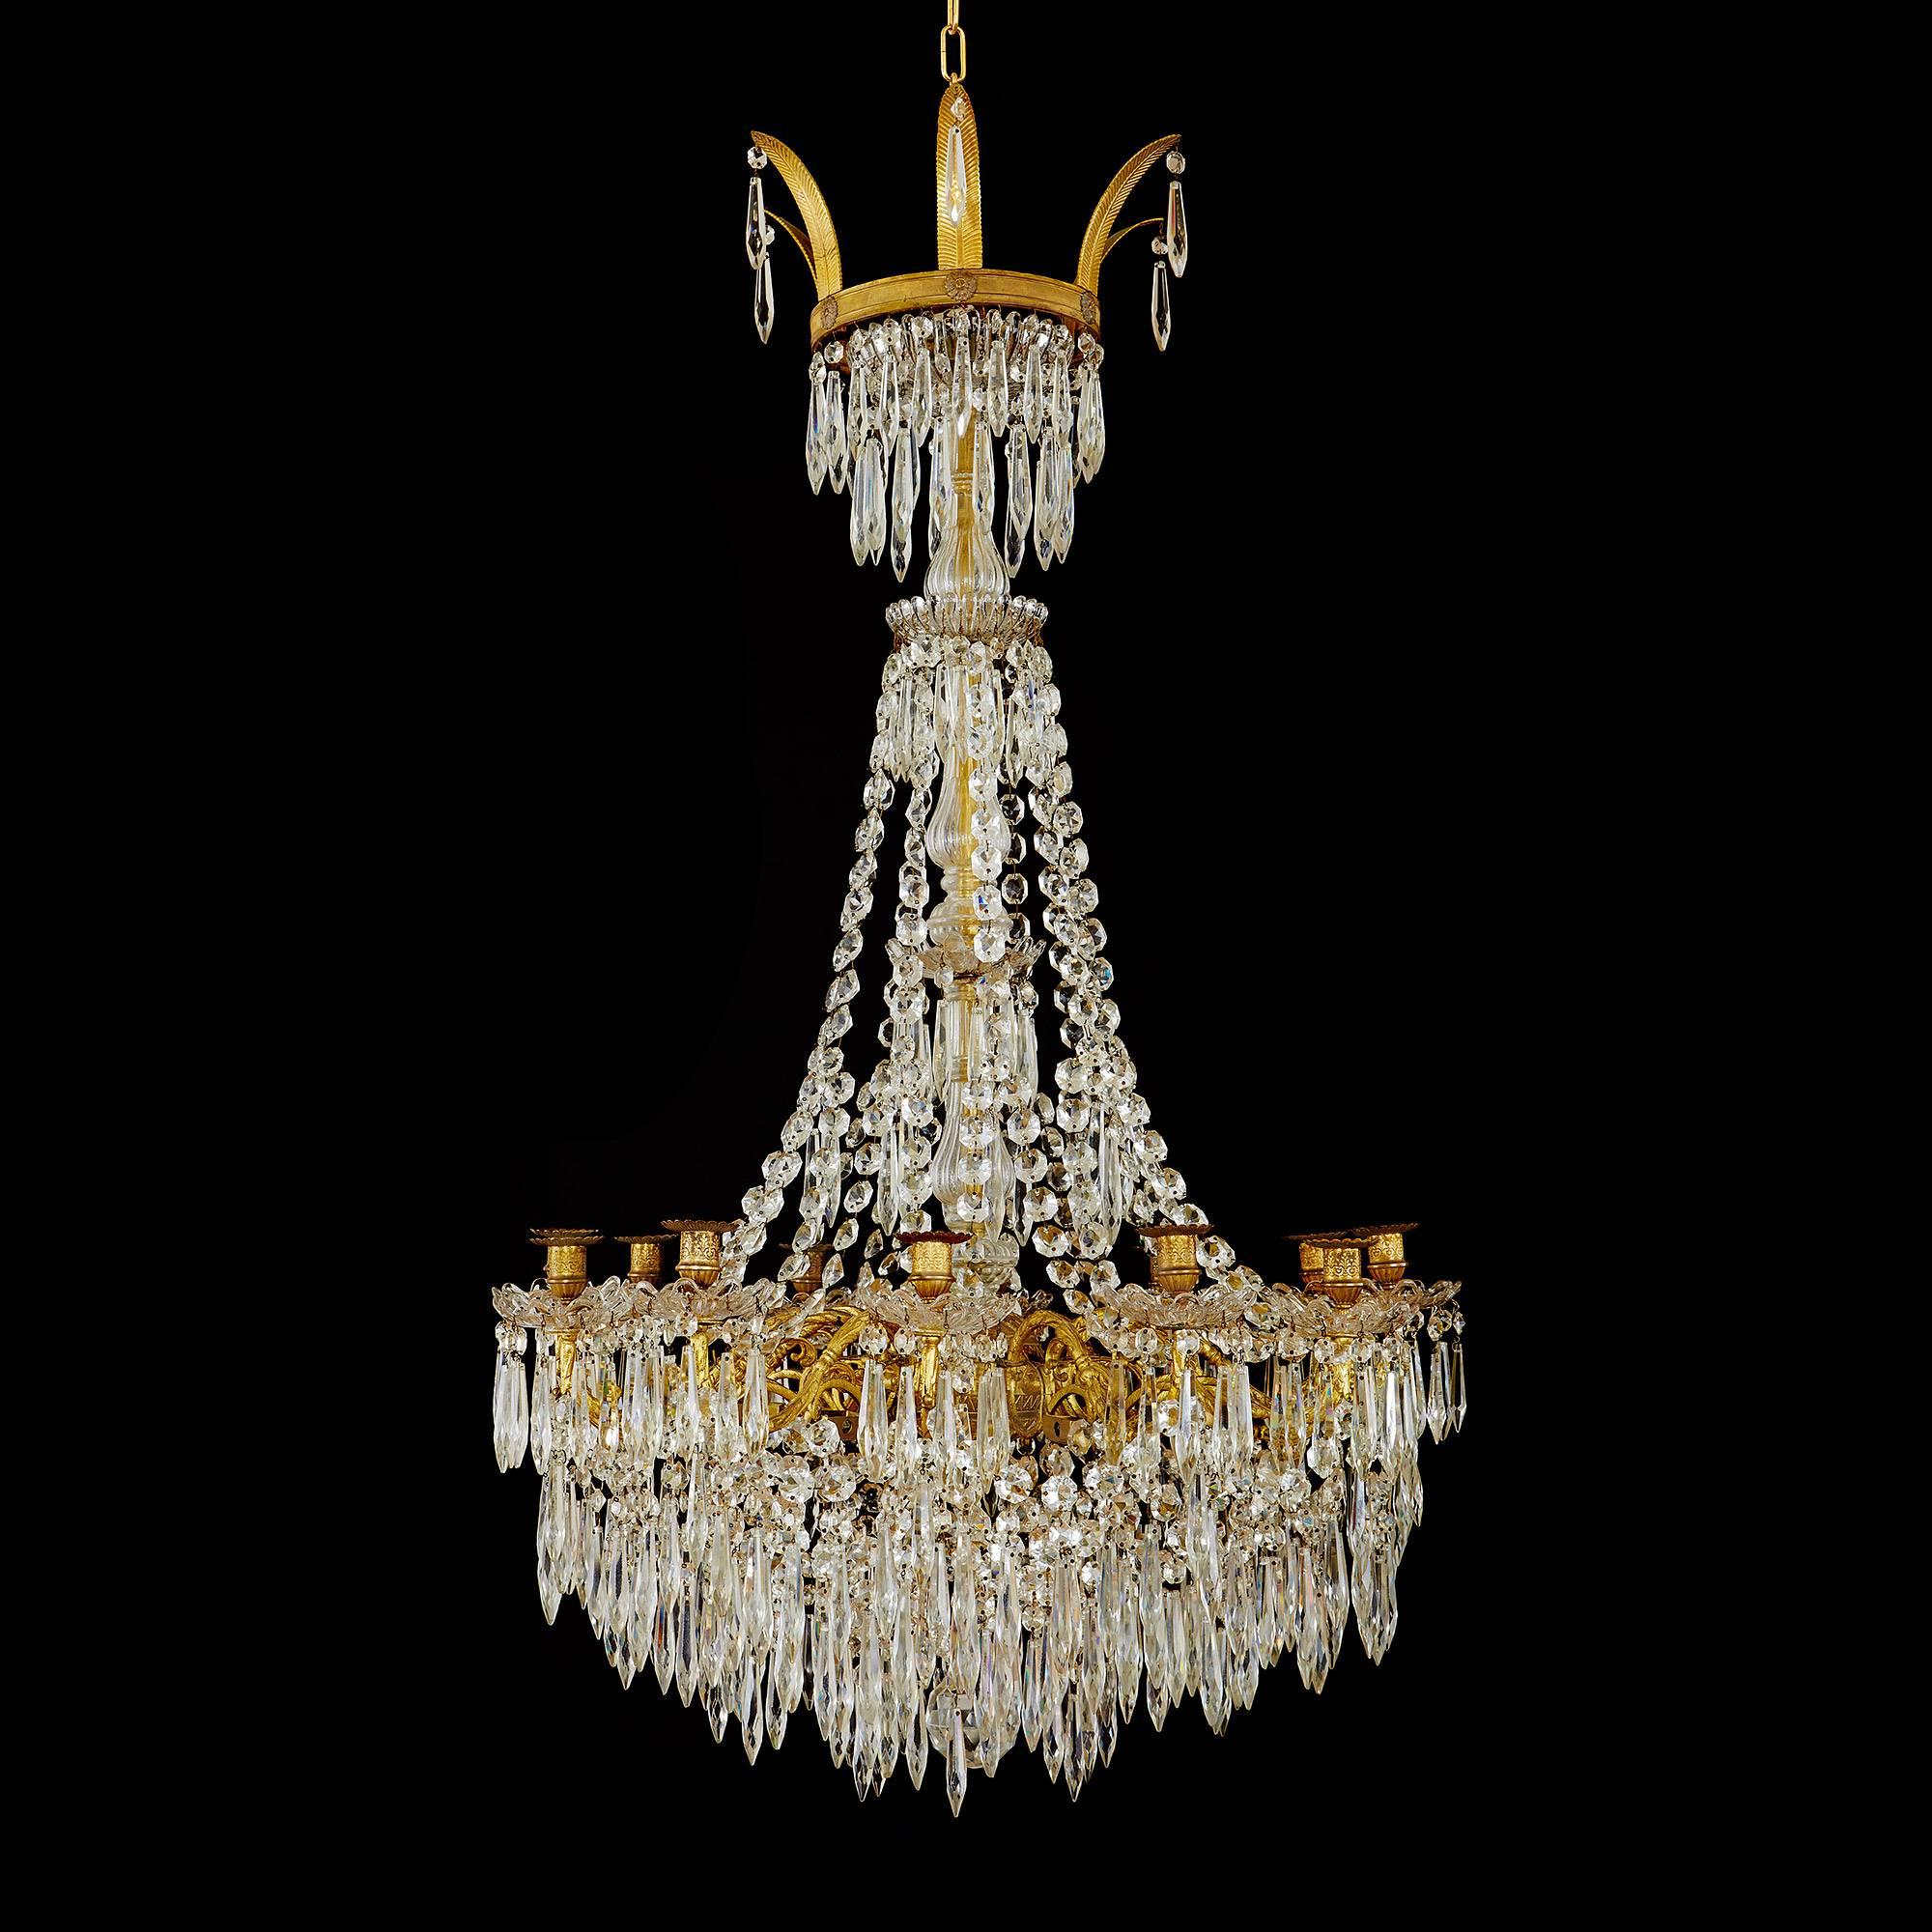 This exquisite chandelier is a true work of art, demonstrating the very finest of craftsmanship from the French Empire period. The chandelier is composed of a gilt bronze (ormolu) frame, which comprises a lower basket featuring scrolling branches of